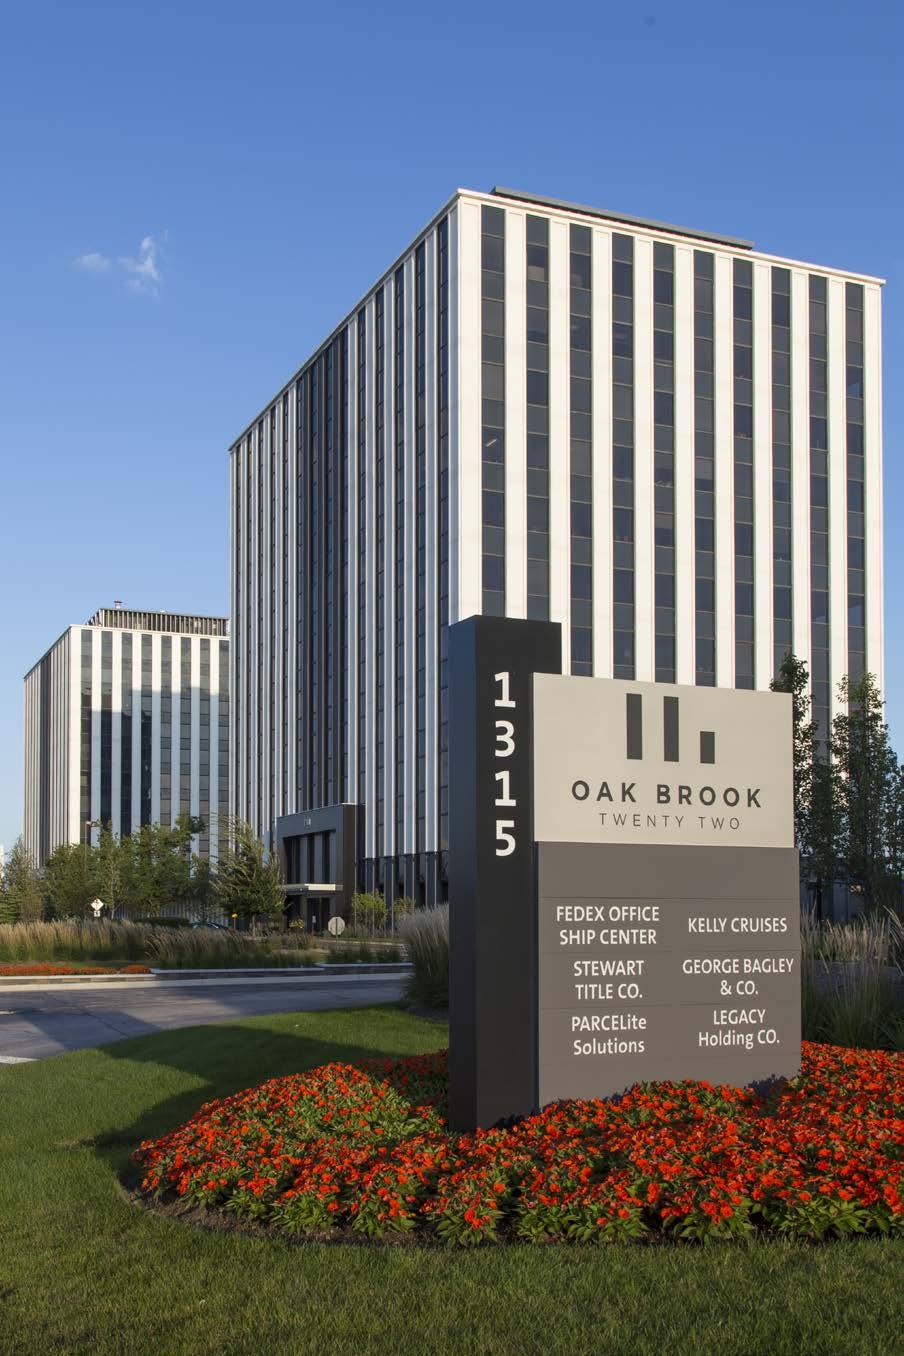 PROMINENT MAIN AND MAIN L O C AT I O N Located at the southwest corner of the intersection of 22nd Street and Spring Road, immediately adjacent to the East/West Tollroad on/off ramp, Oak Brook 22 has